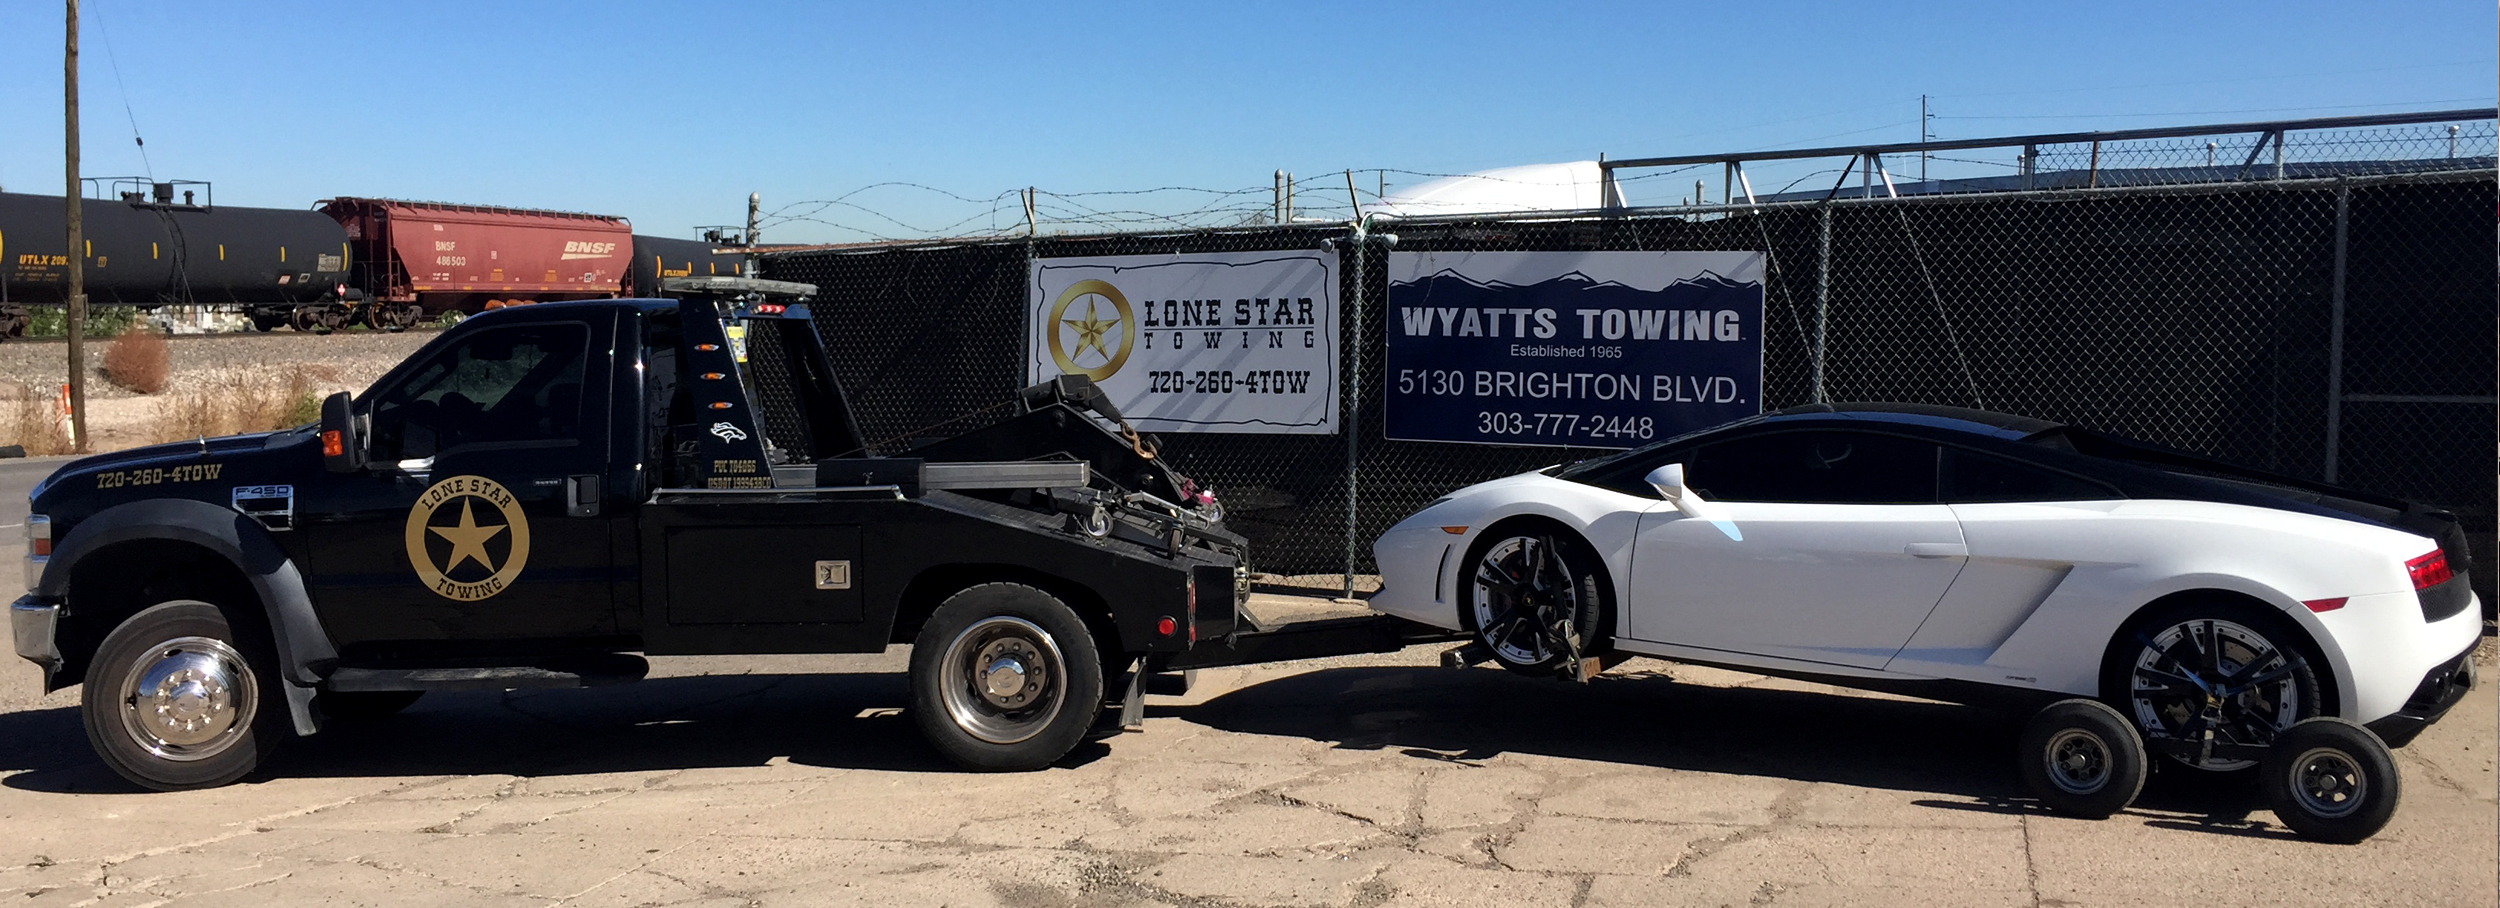 Lone Star Towing